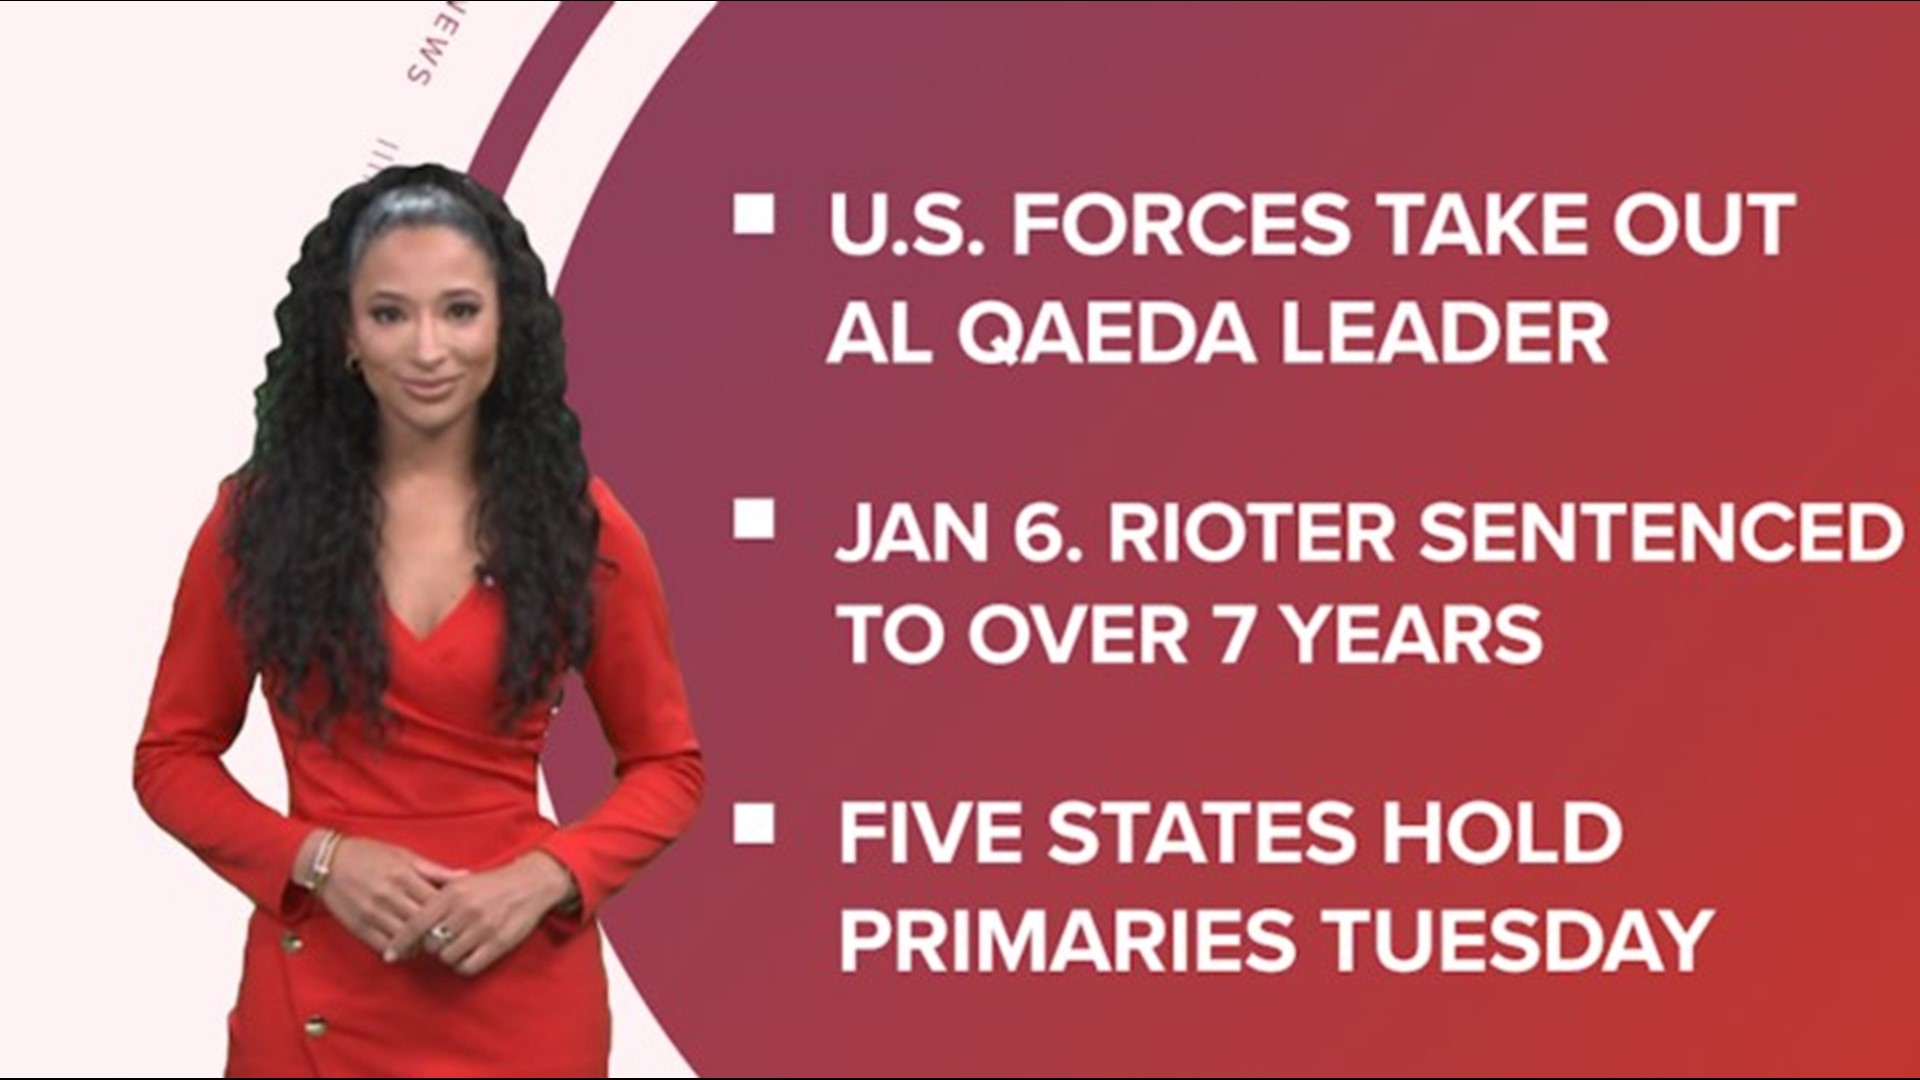 A look at what is happening in the news from US forces killing an Al Qaeda leader to California's largest wildfire of 2022 and primary elections in five states.